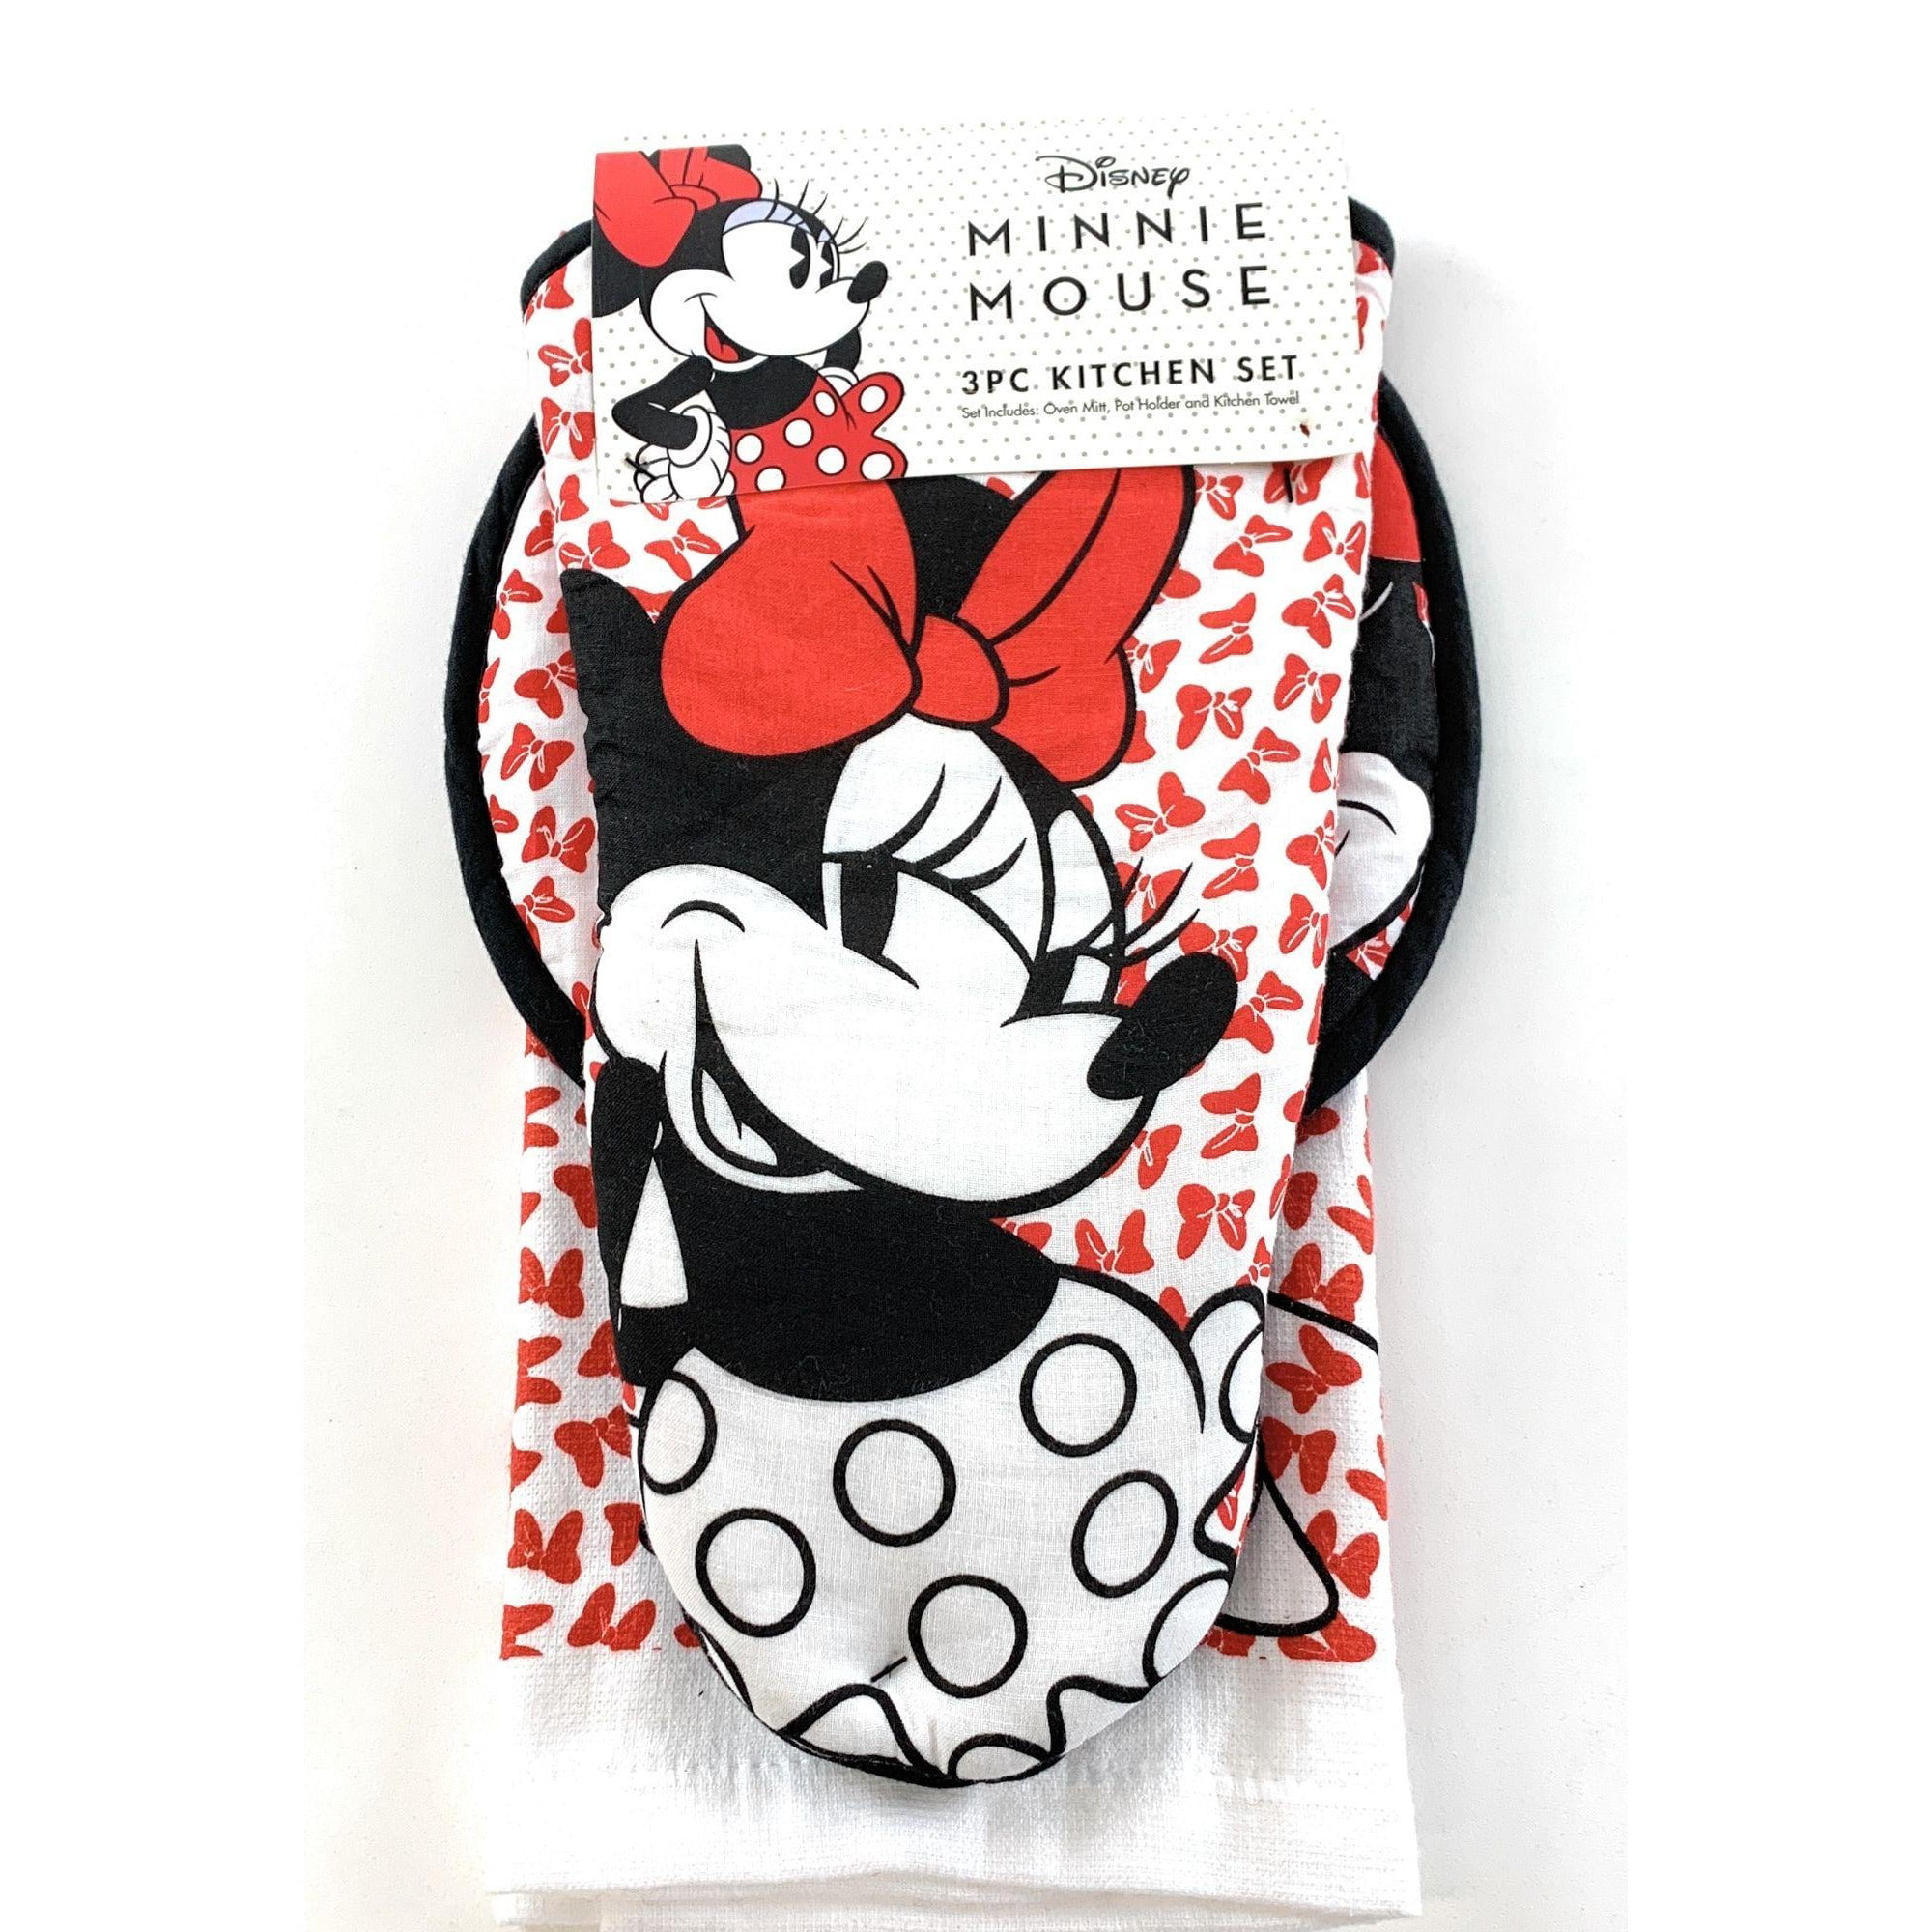 Best Brands Disney Kitchen Oven Mitt/Glove and Square Potholder Set  w/Neoprene for Easy Non-Slip Gripping - Protect Your Hands in The Kitchen -  Heat